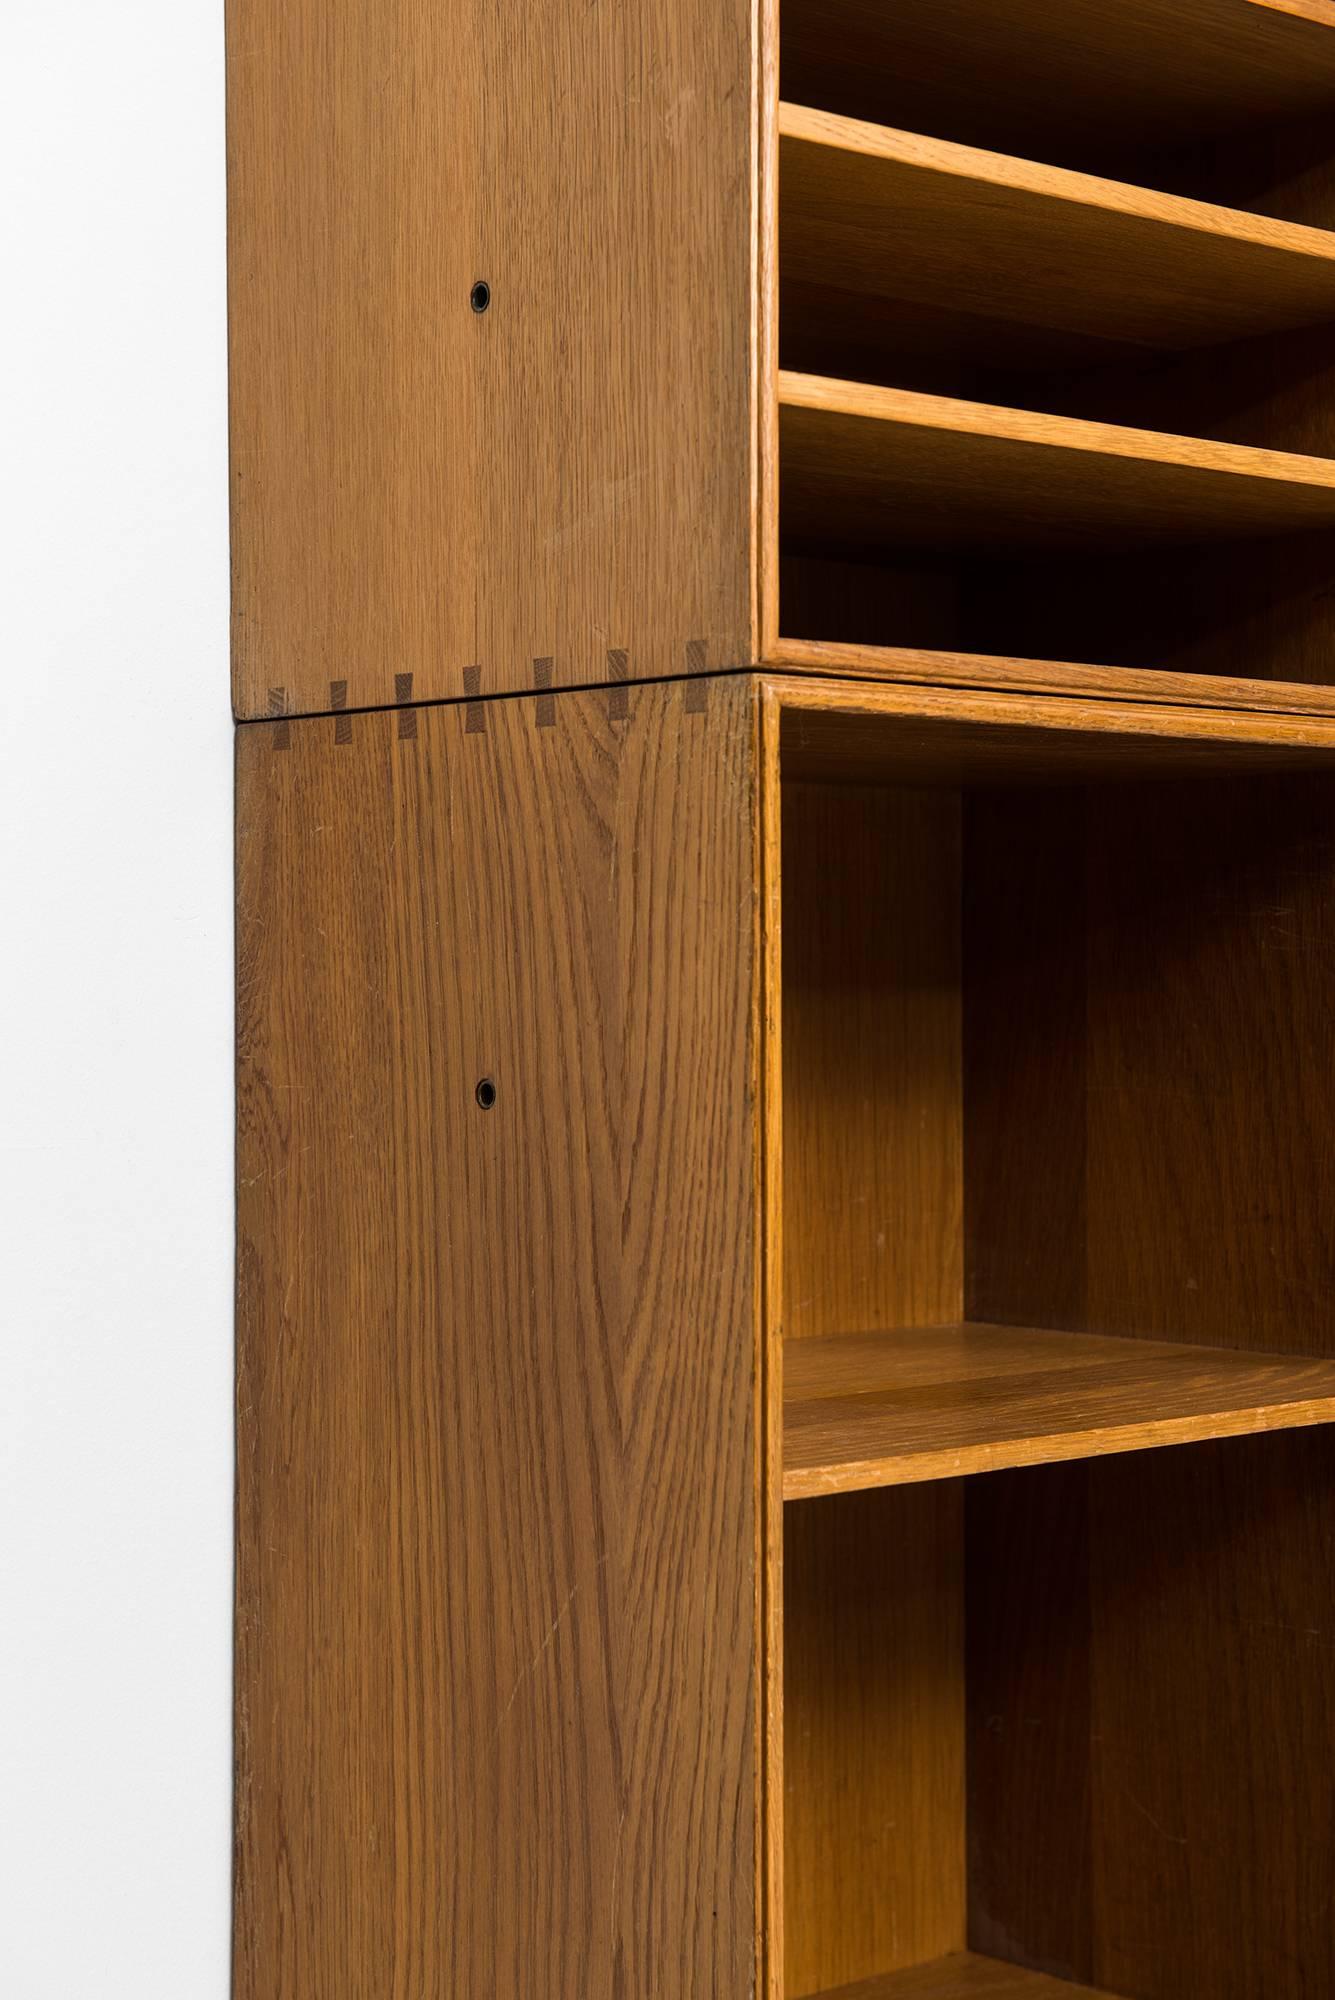 Danish Set of Eight Bookcases Designed by Mogens Koch Produced by Rud Rasmussen